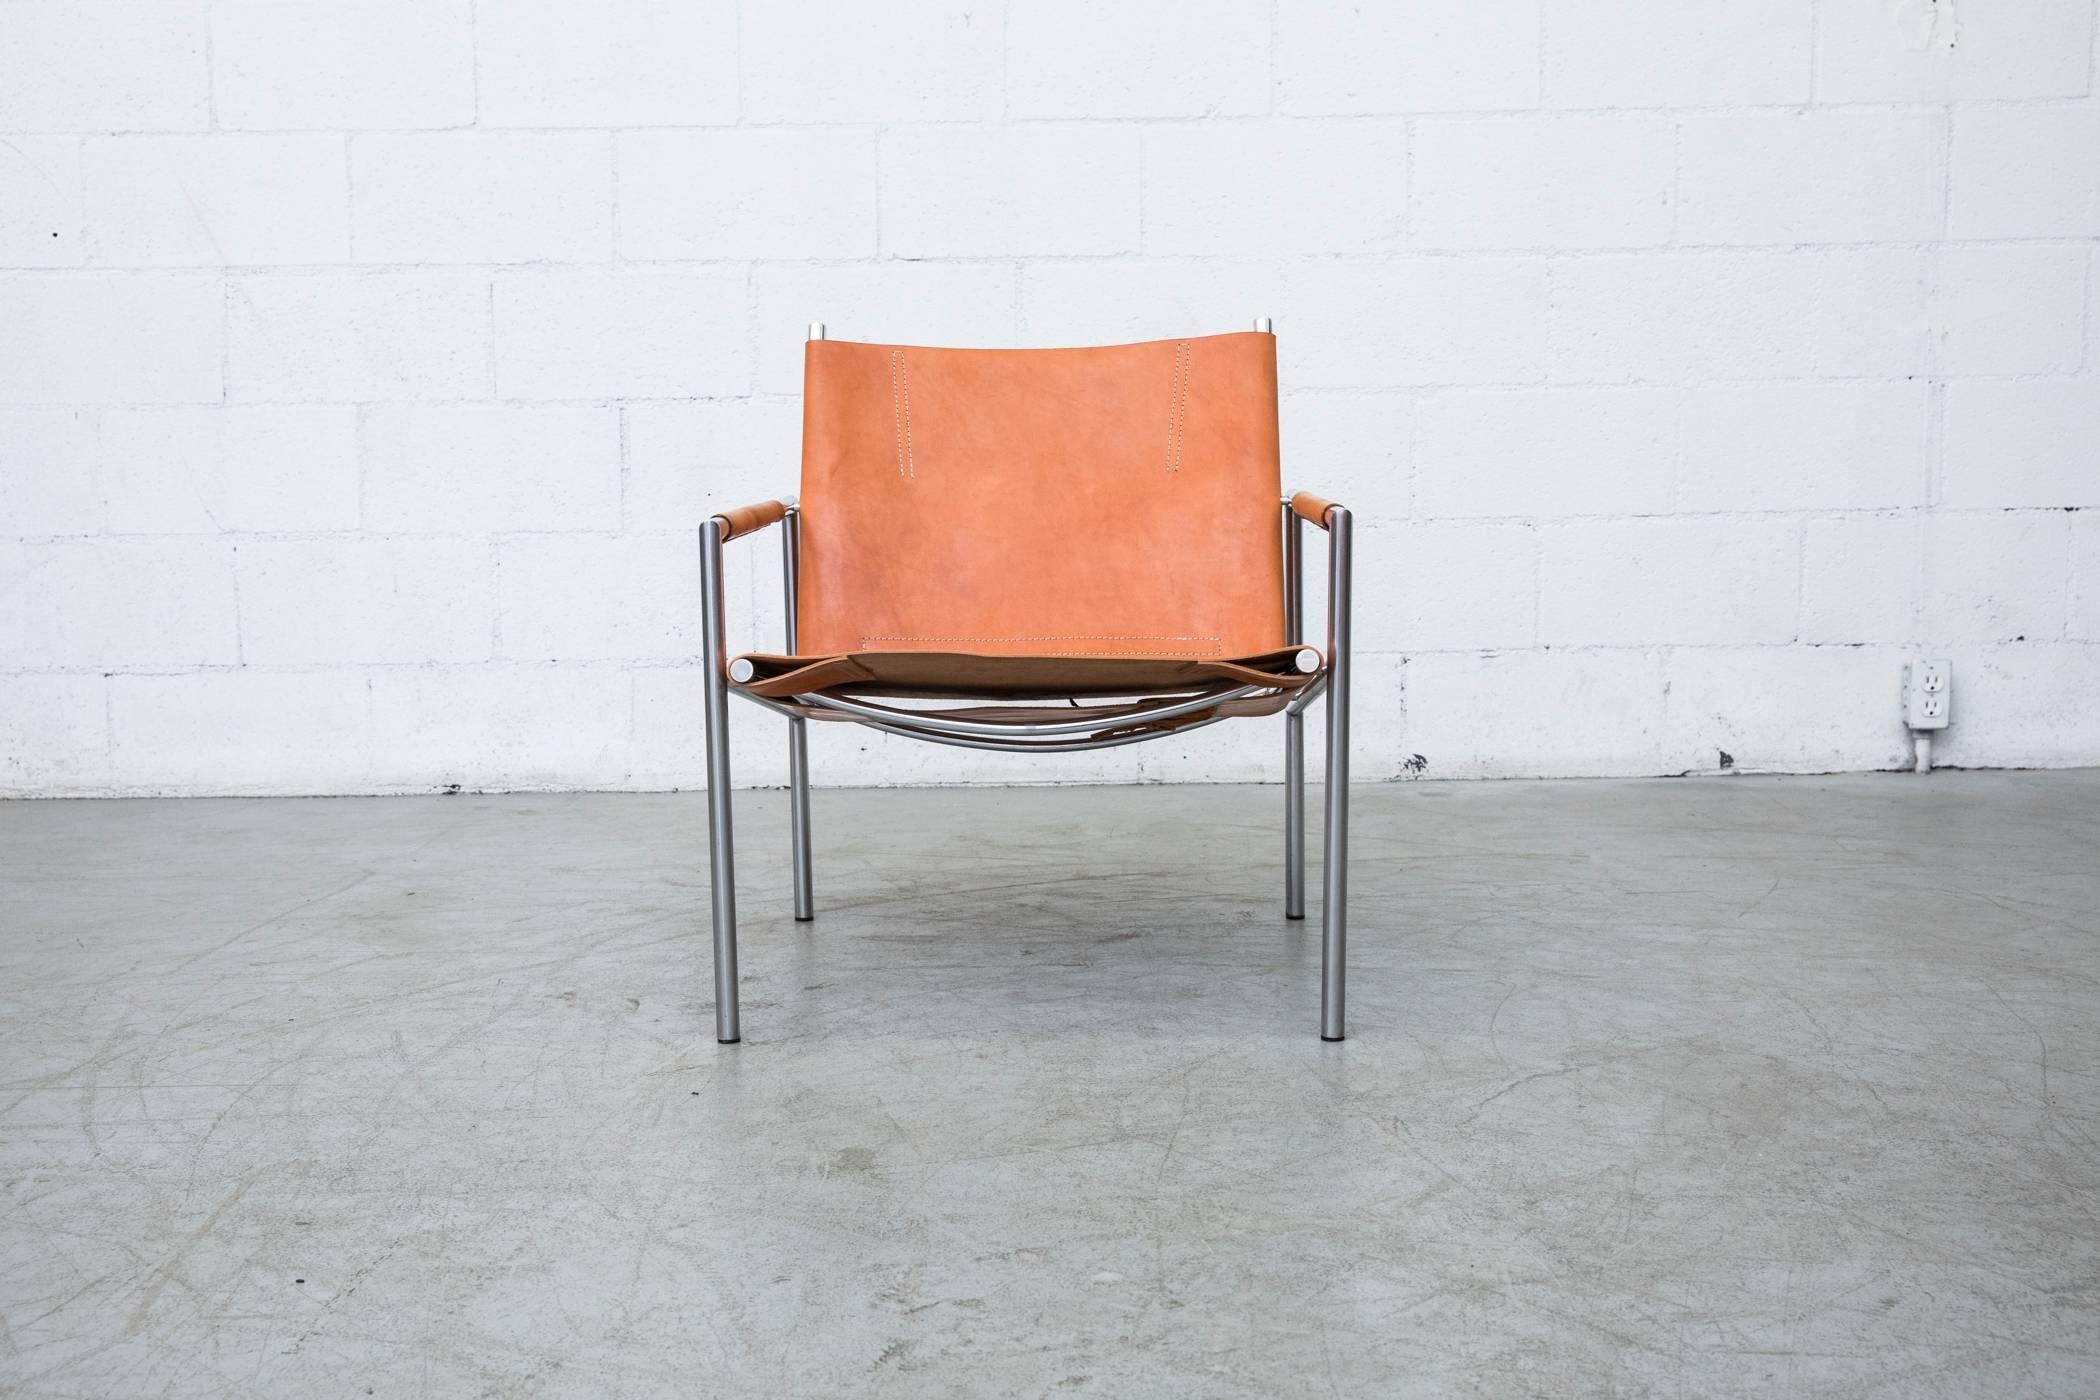 Martin Visser SZ01 lounge chair in new natural saddle leather with original leather detail on armrests and visible patina. Chrome-plated frame also in original condition. Designed for t'Spectrum in 1960. Another one is available with original